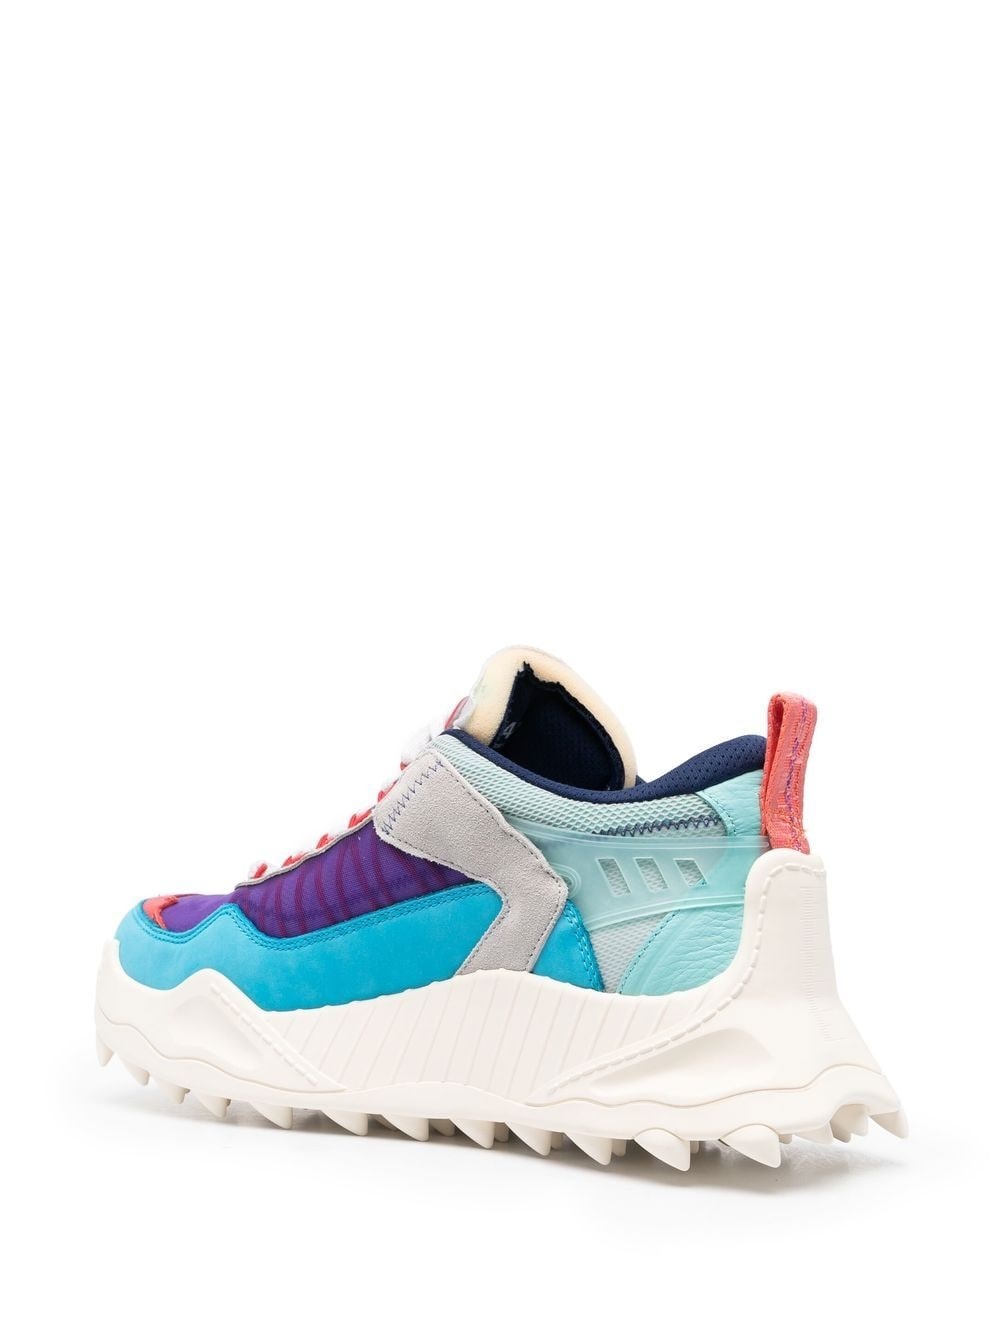 Off-White Odsy-1000 low-top sneakers | REVERSIBLE